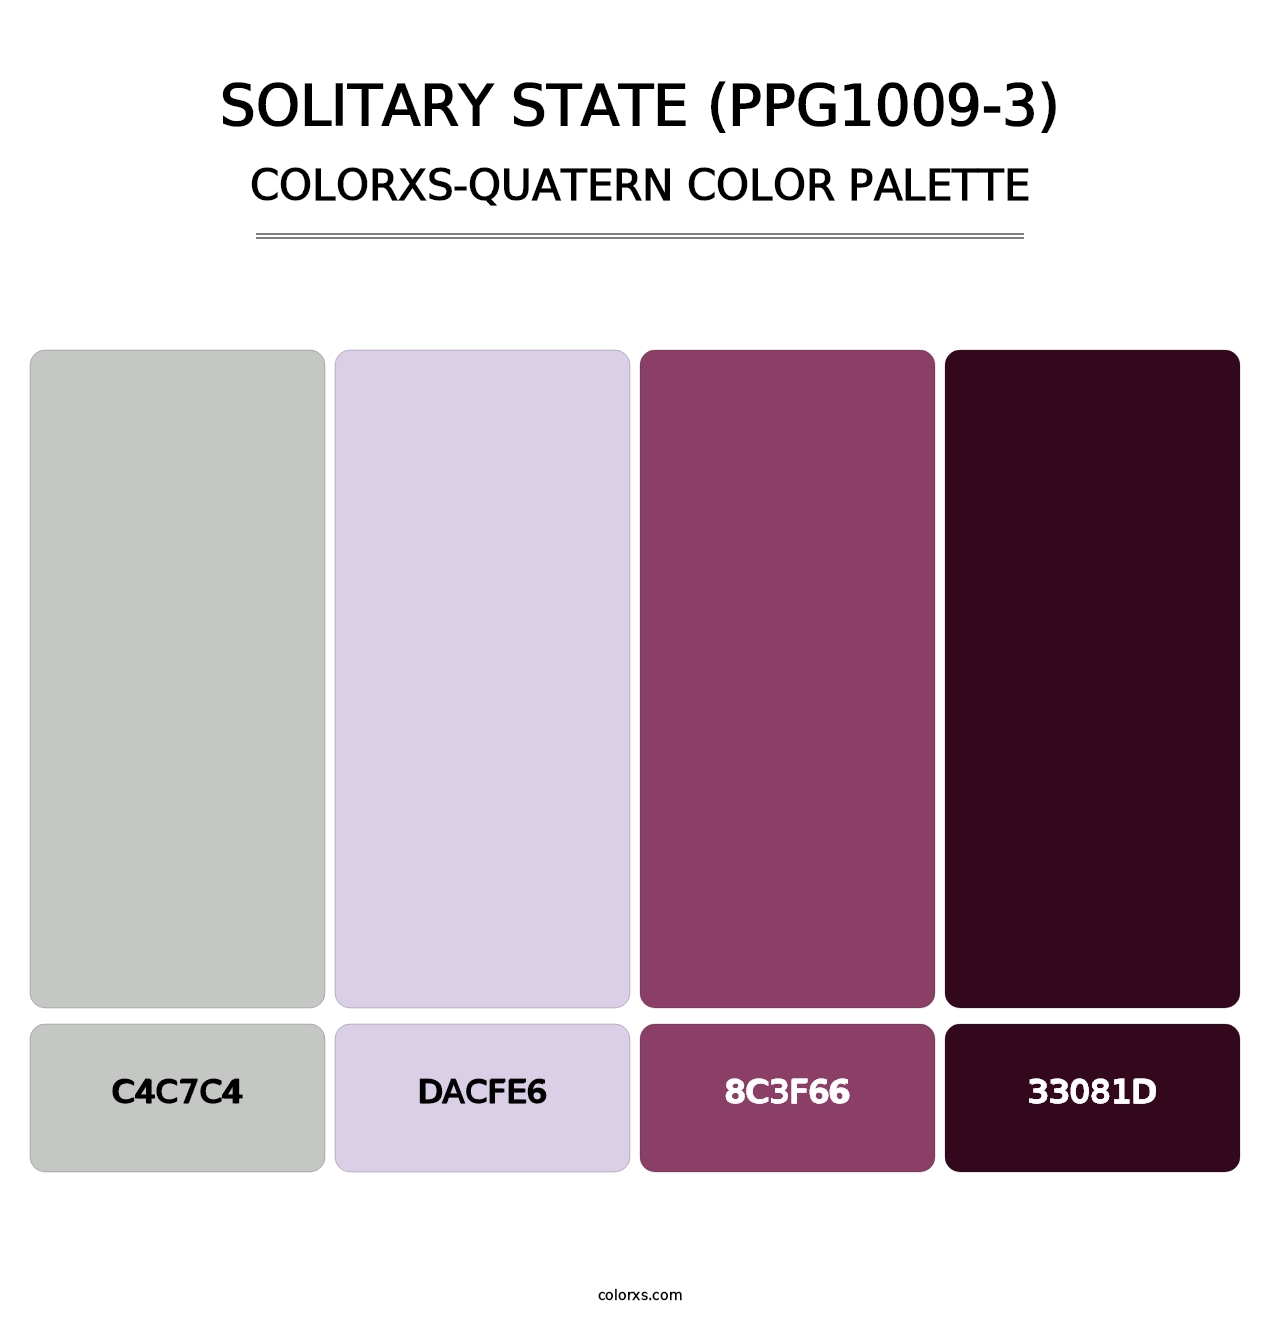 Solitary State (PPG1009-3) - Colorxs Quatern Palette